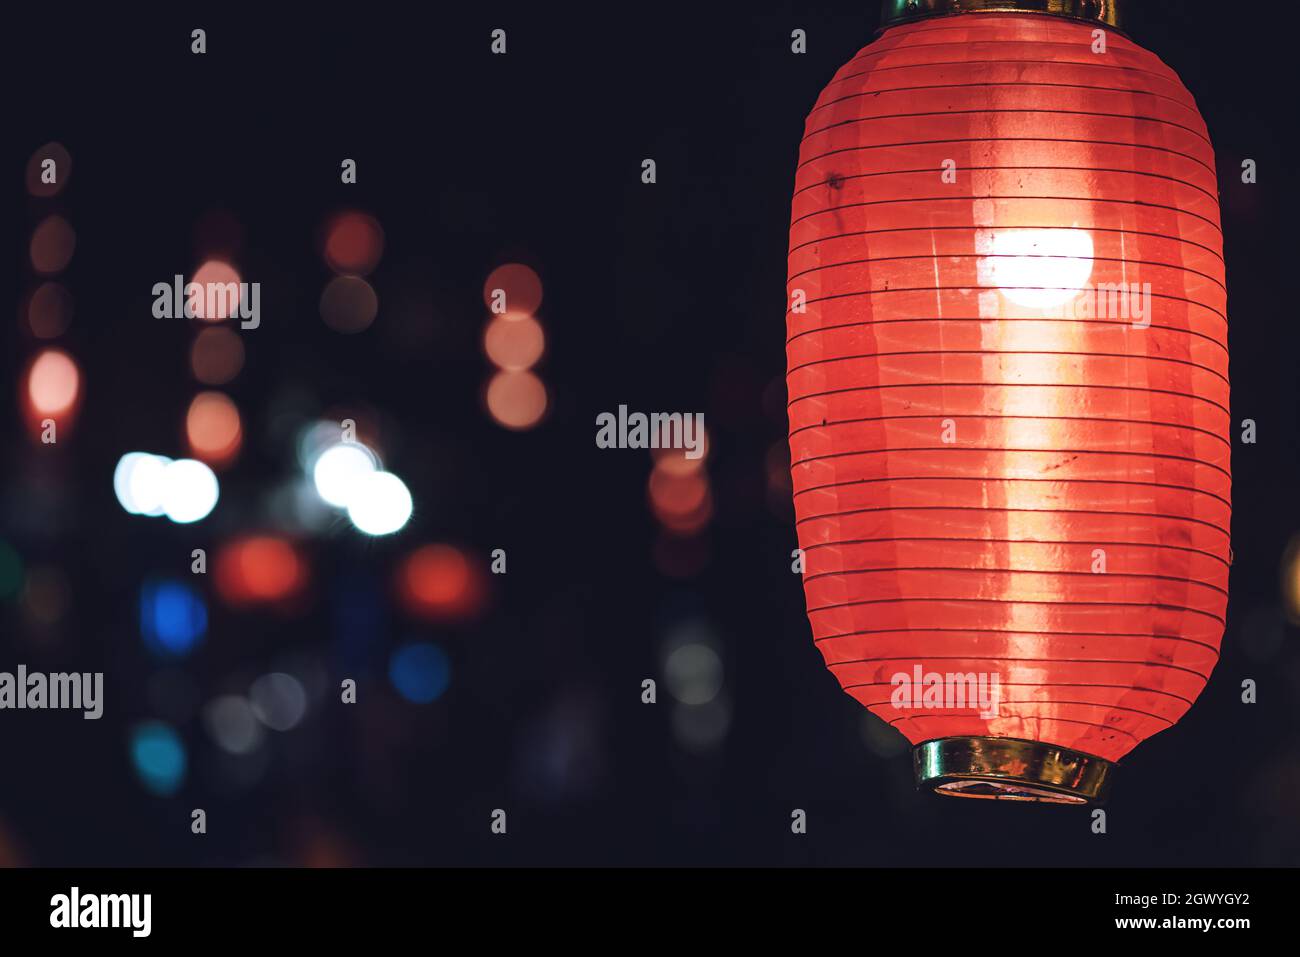 Red chinese lanterns in a row illuminated at night in Chengdu, Sichuan province, China Stock Photo